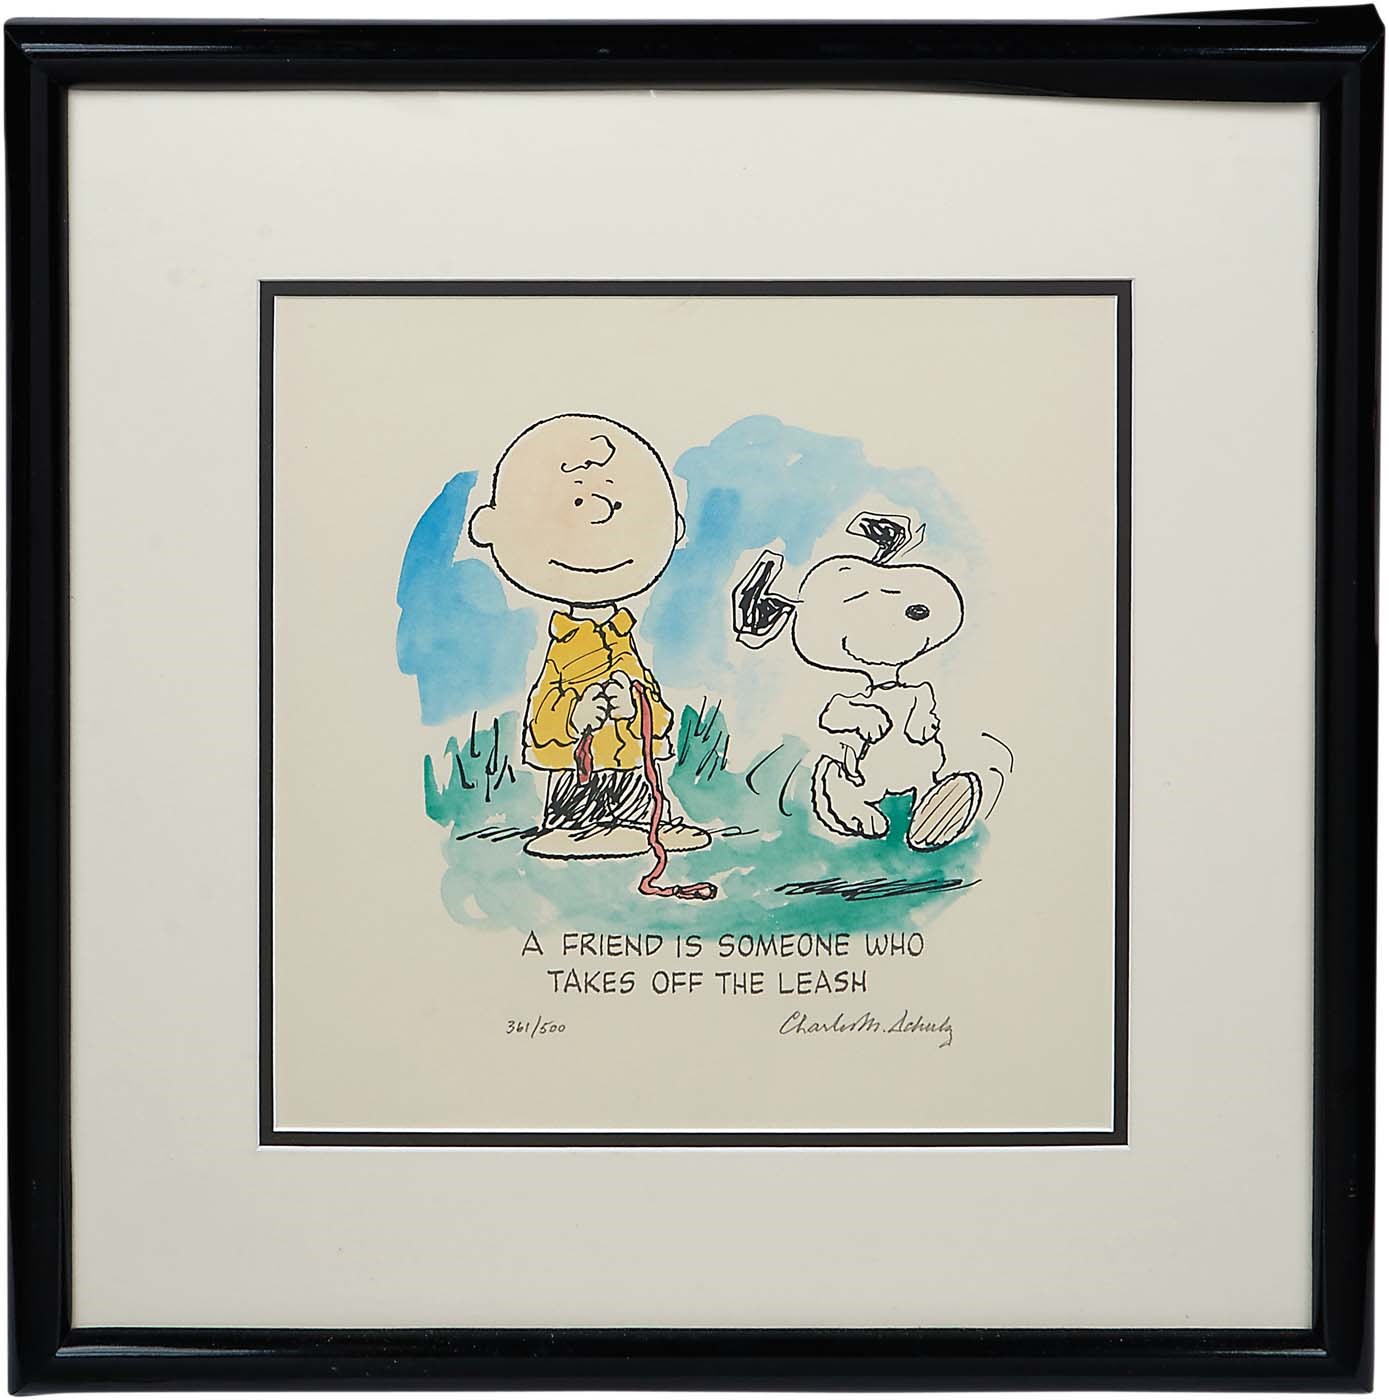 Charles Schulz Signed Limited Edition Peanuts Lithograph